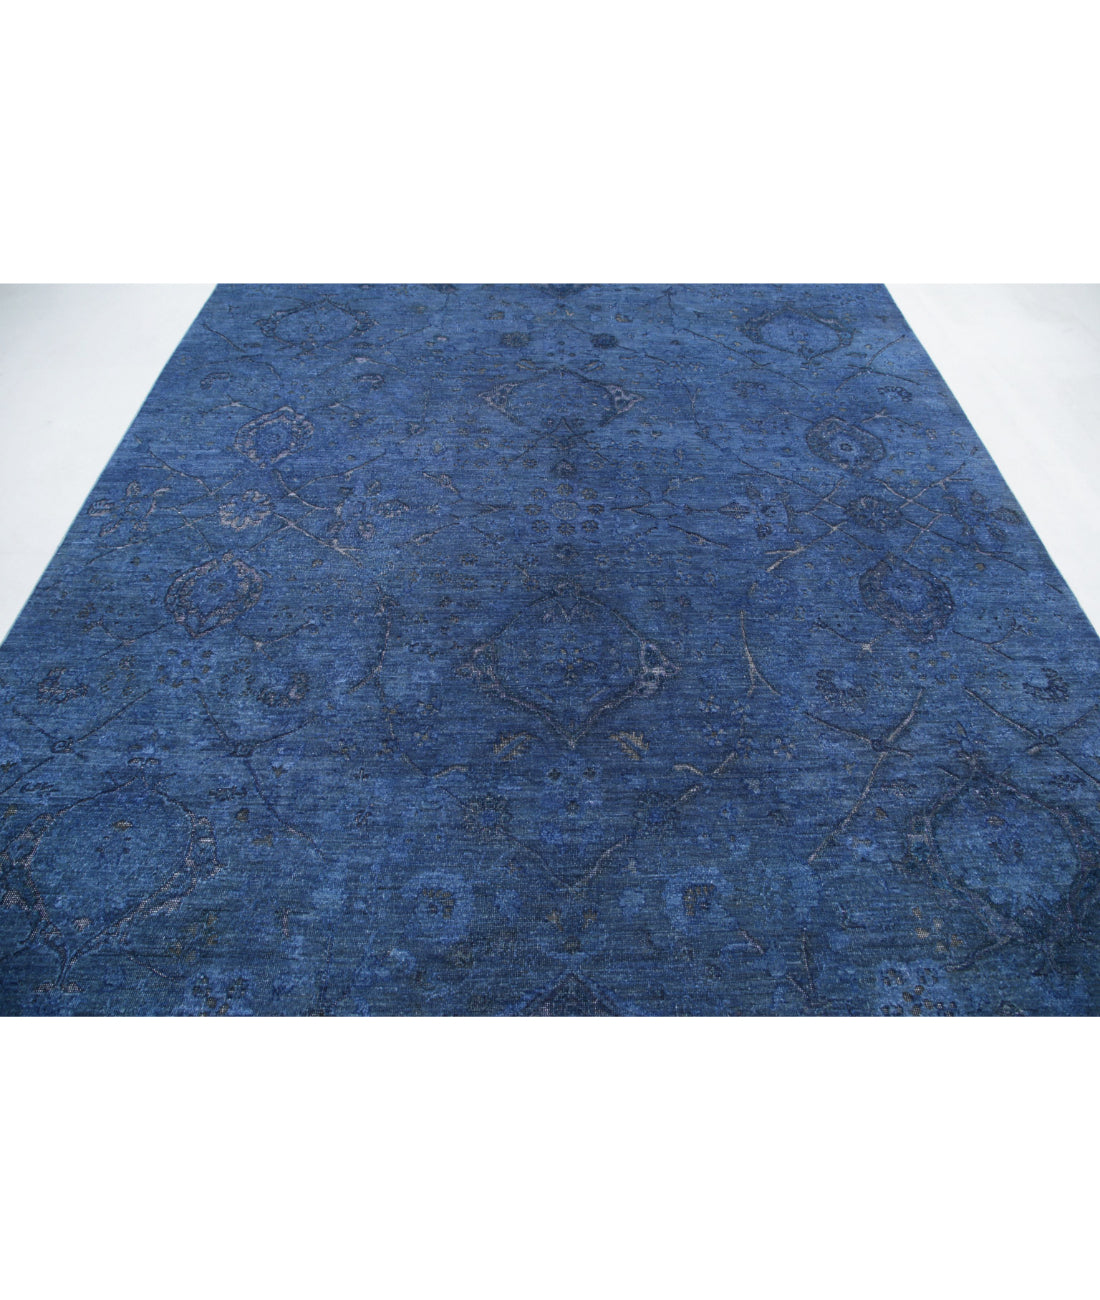 Hand Knotted Onyx Wool Rug - 8'0'' x 10'8'' 8'0'' x 10'8'' (240 X 320) / Blue / Blue